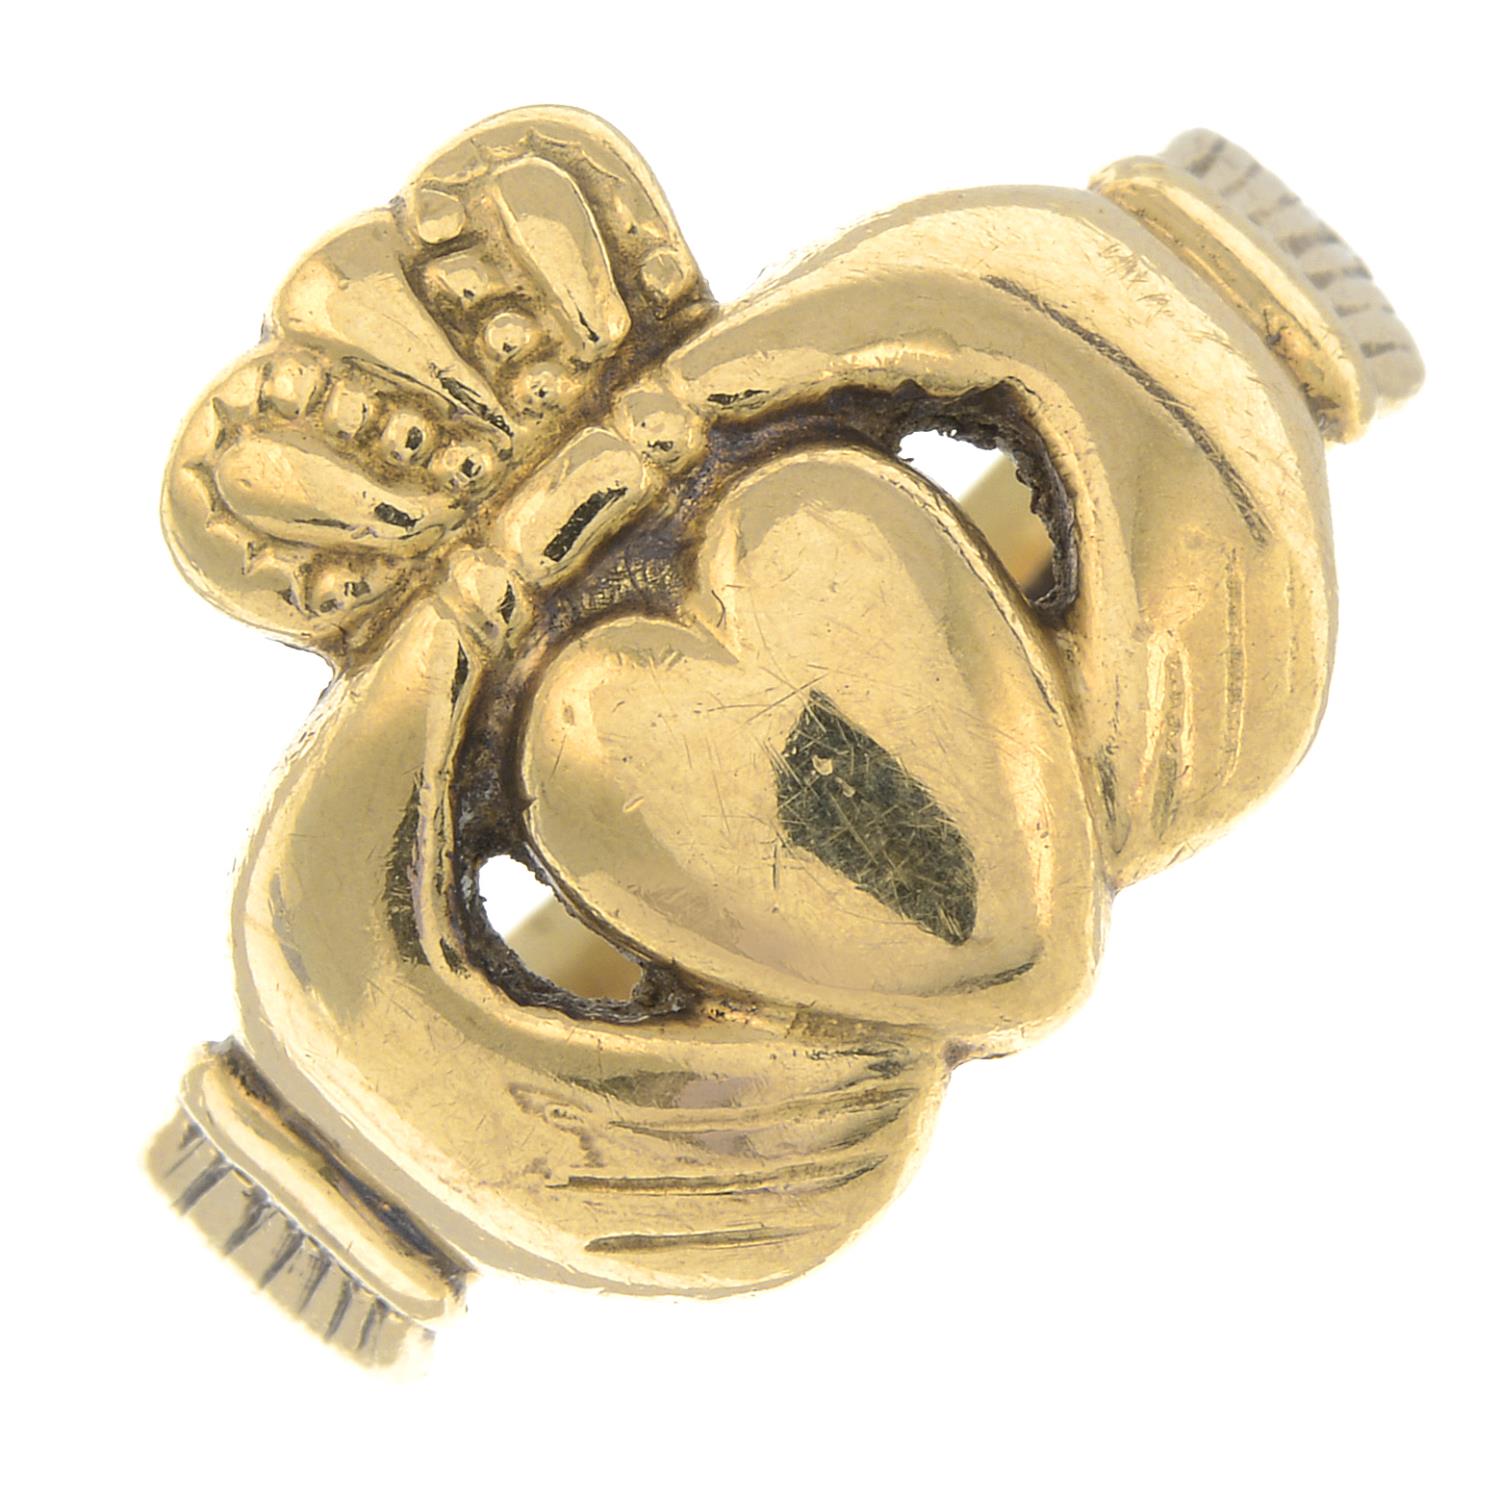 A 9ct gold claddagh ring.Hallmarks for 9ct gold, partially indistinct.